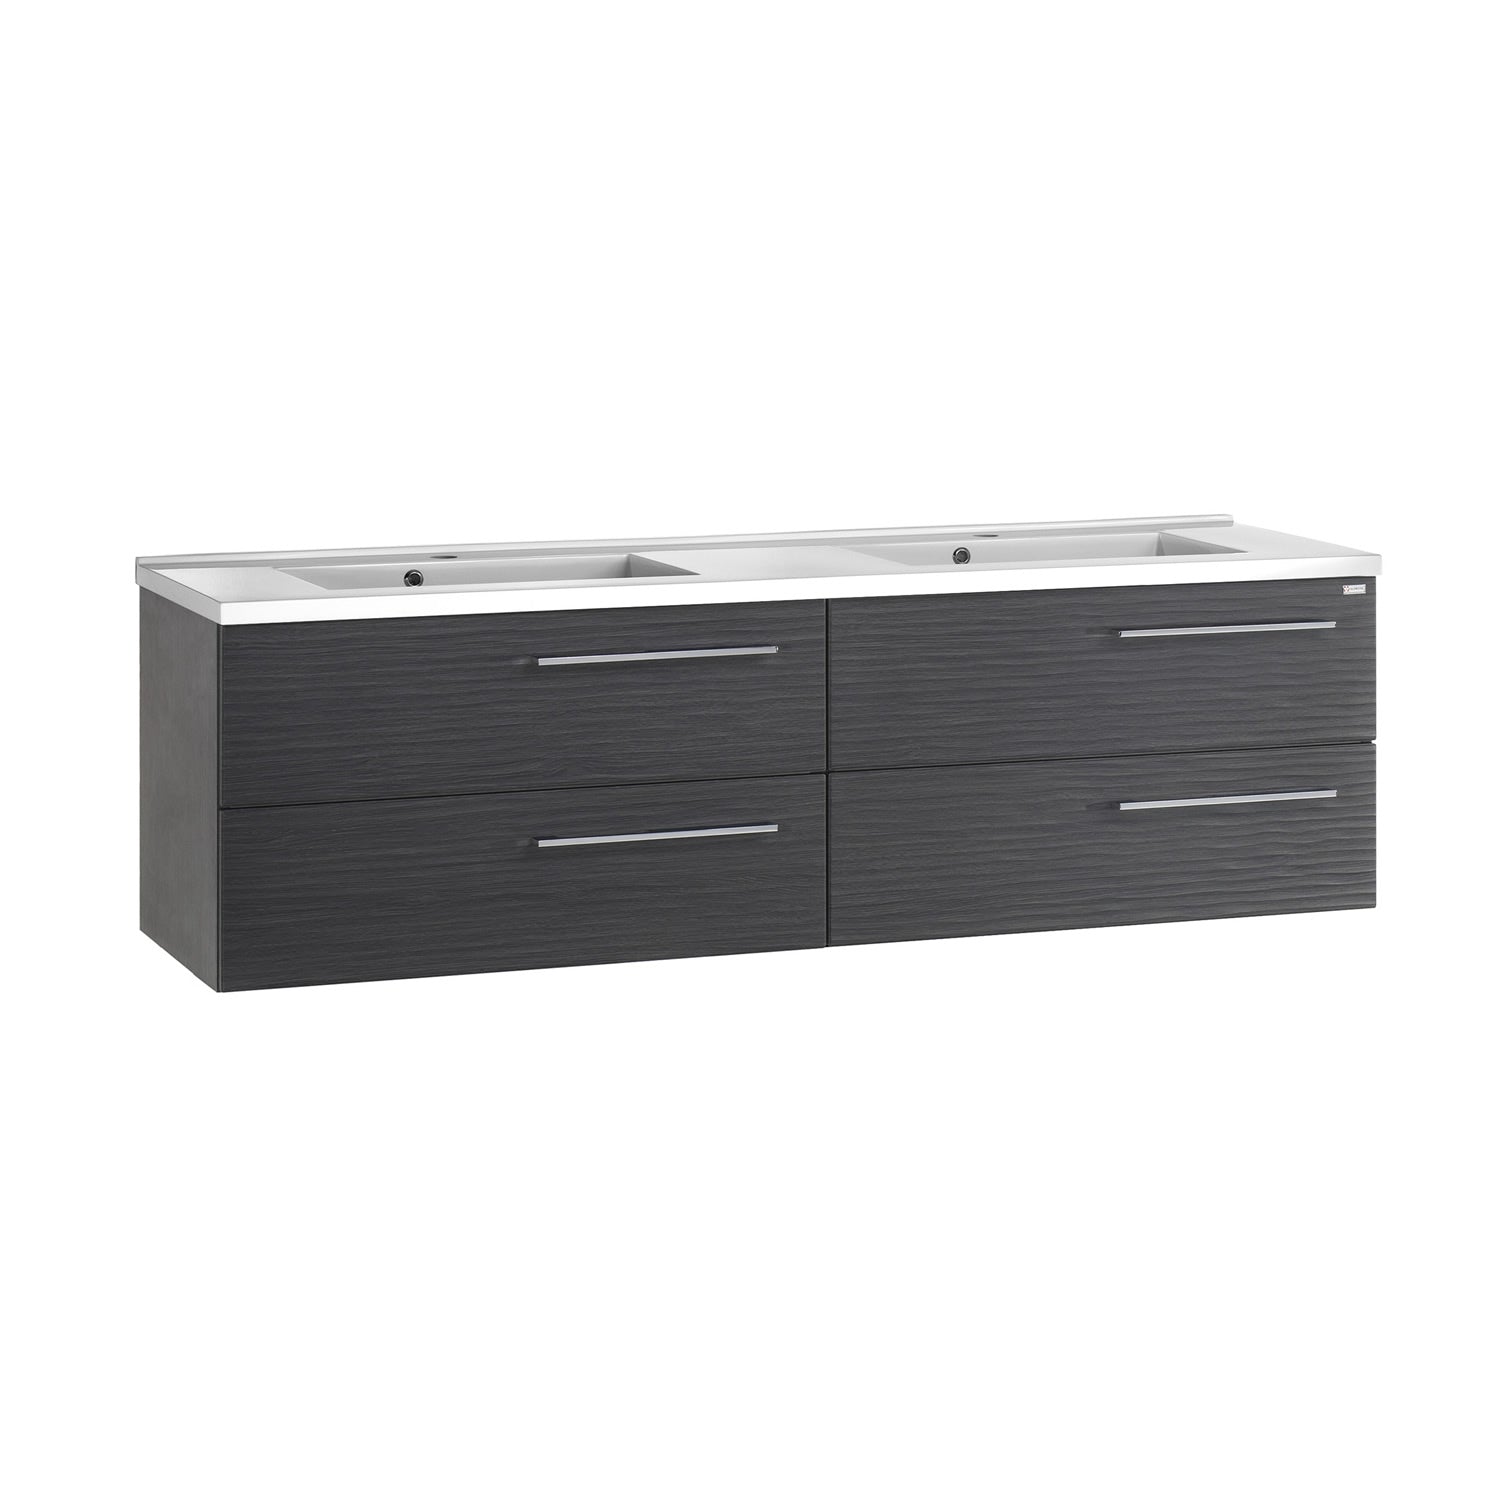 48" Double Vanity, Wall Mount, 4 Drawers with Soft Close, Grey, Serie Dune by VALENZUELA